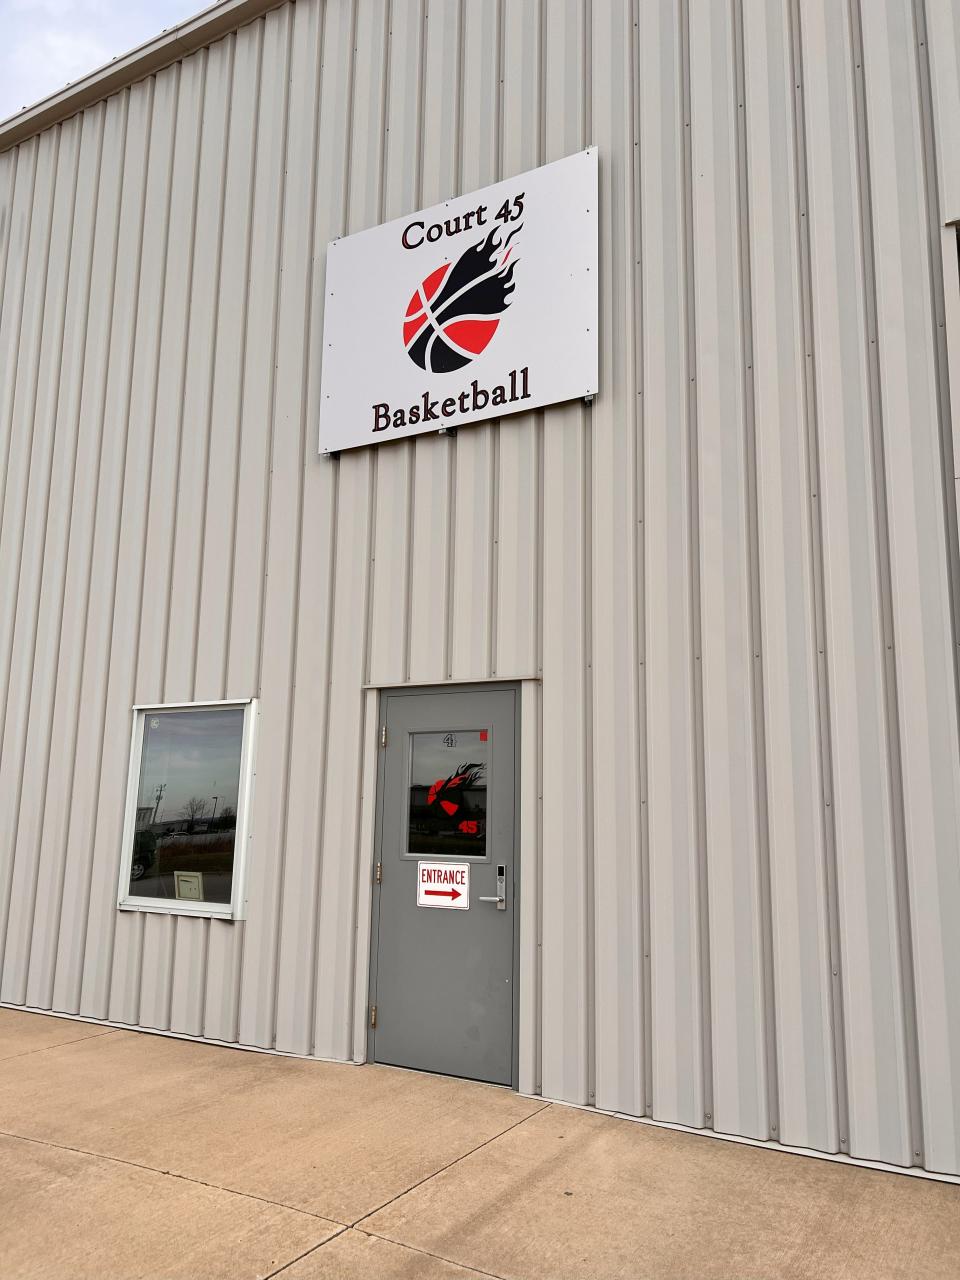 Darryl Moore started Court45 in North Liberty, a coaching facility where he can pass along some of the lessons learned throughout his collegiate and professional career. Court45 is located at 2910 Stoner Ct, North Liberty